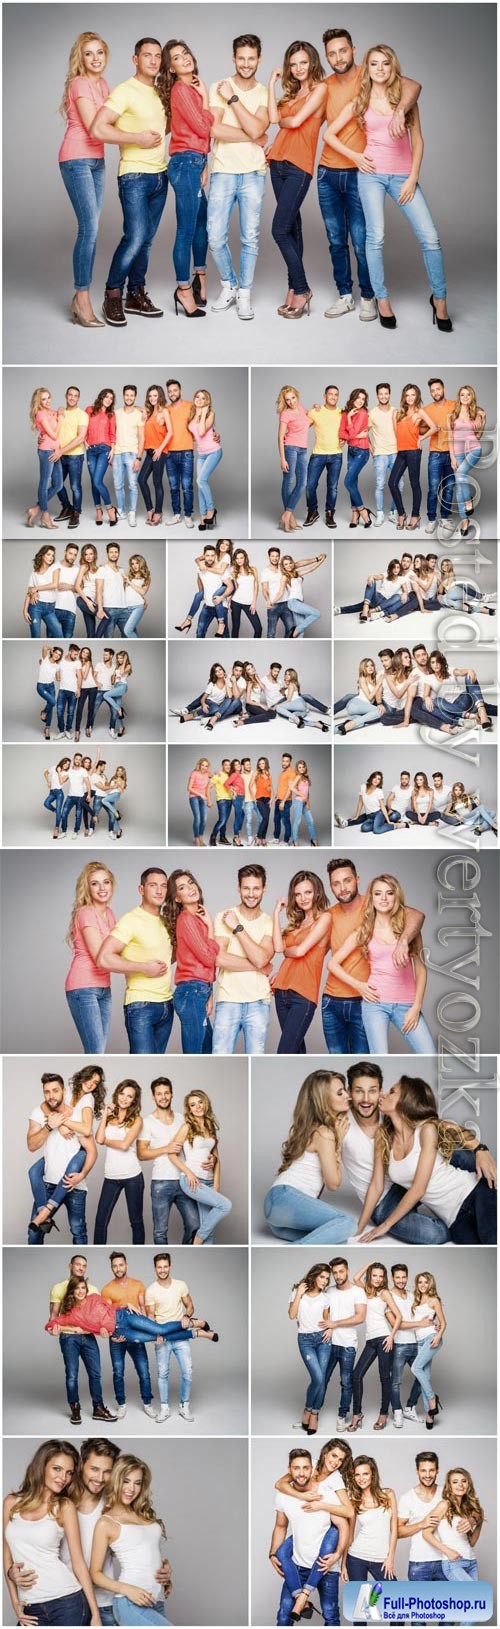 Stylish men and girls in jeans stock photo